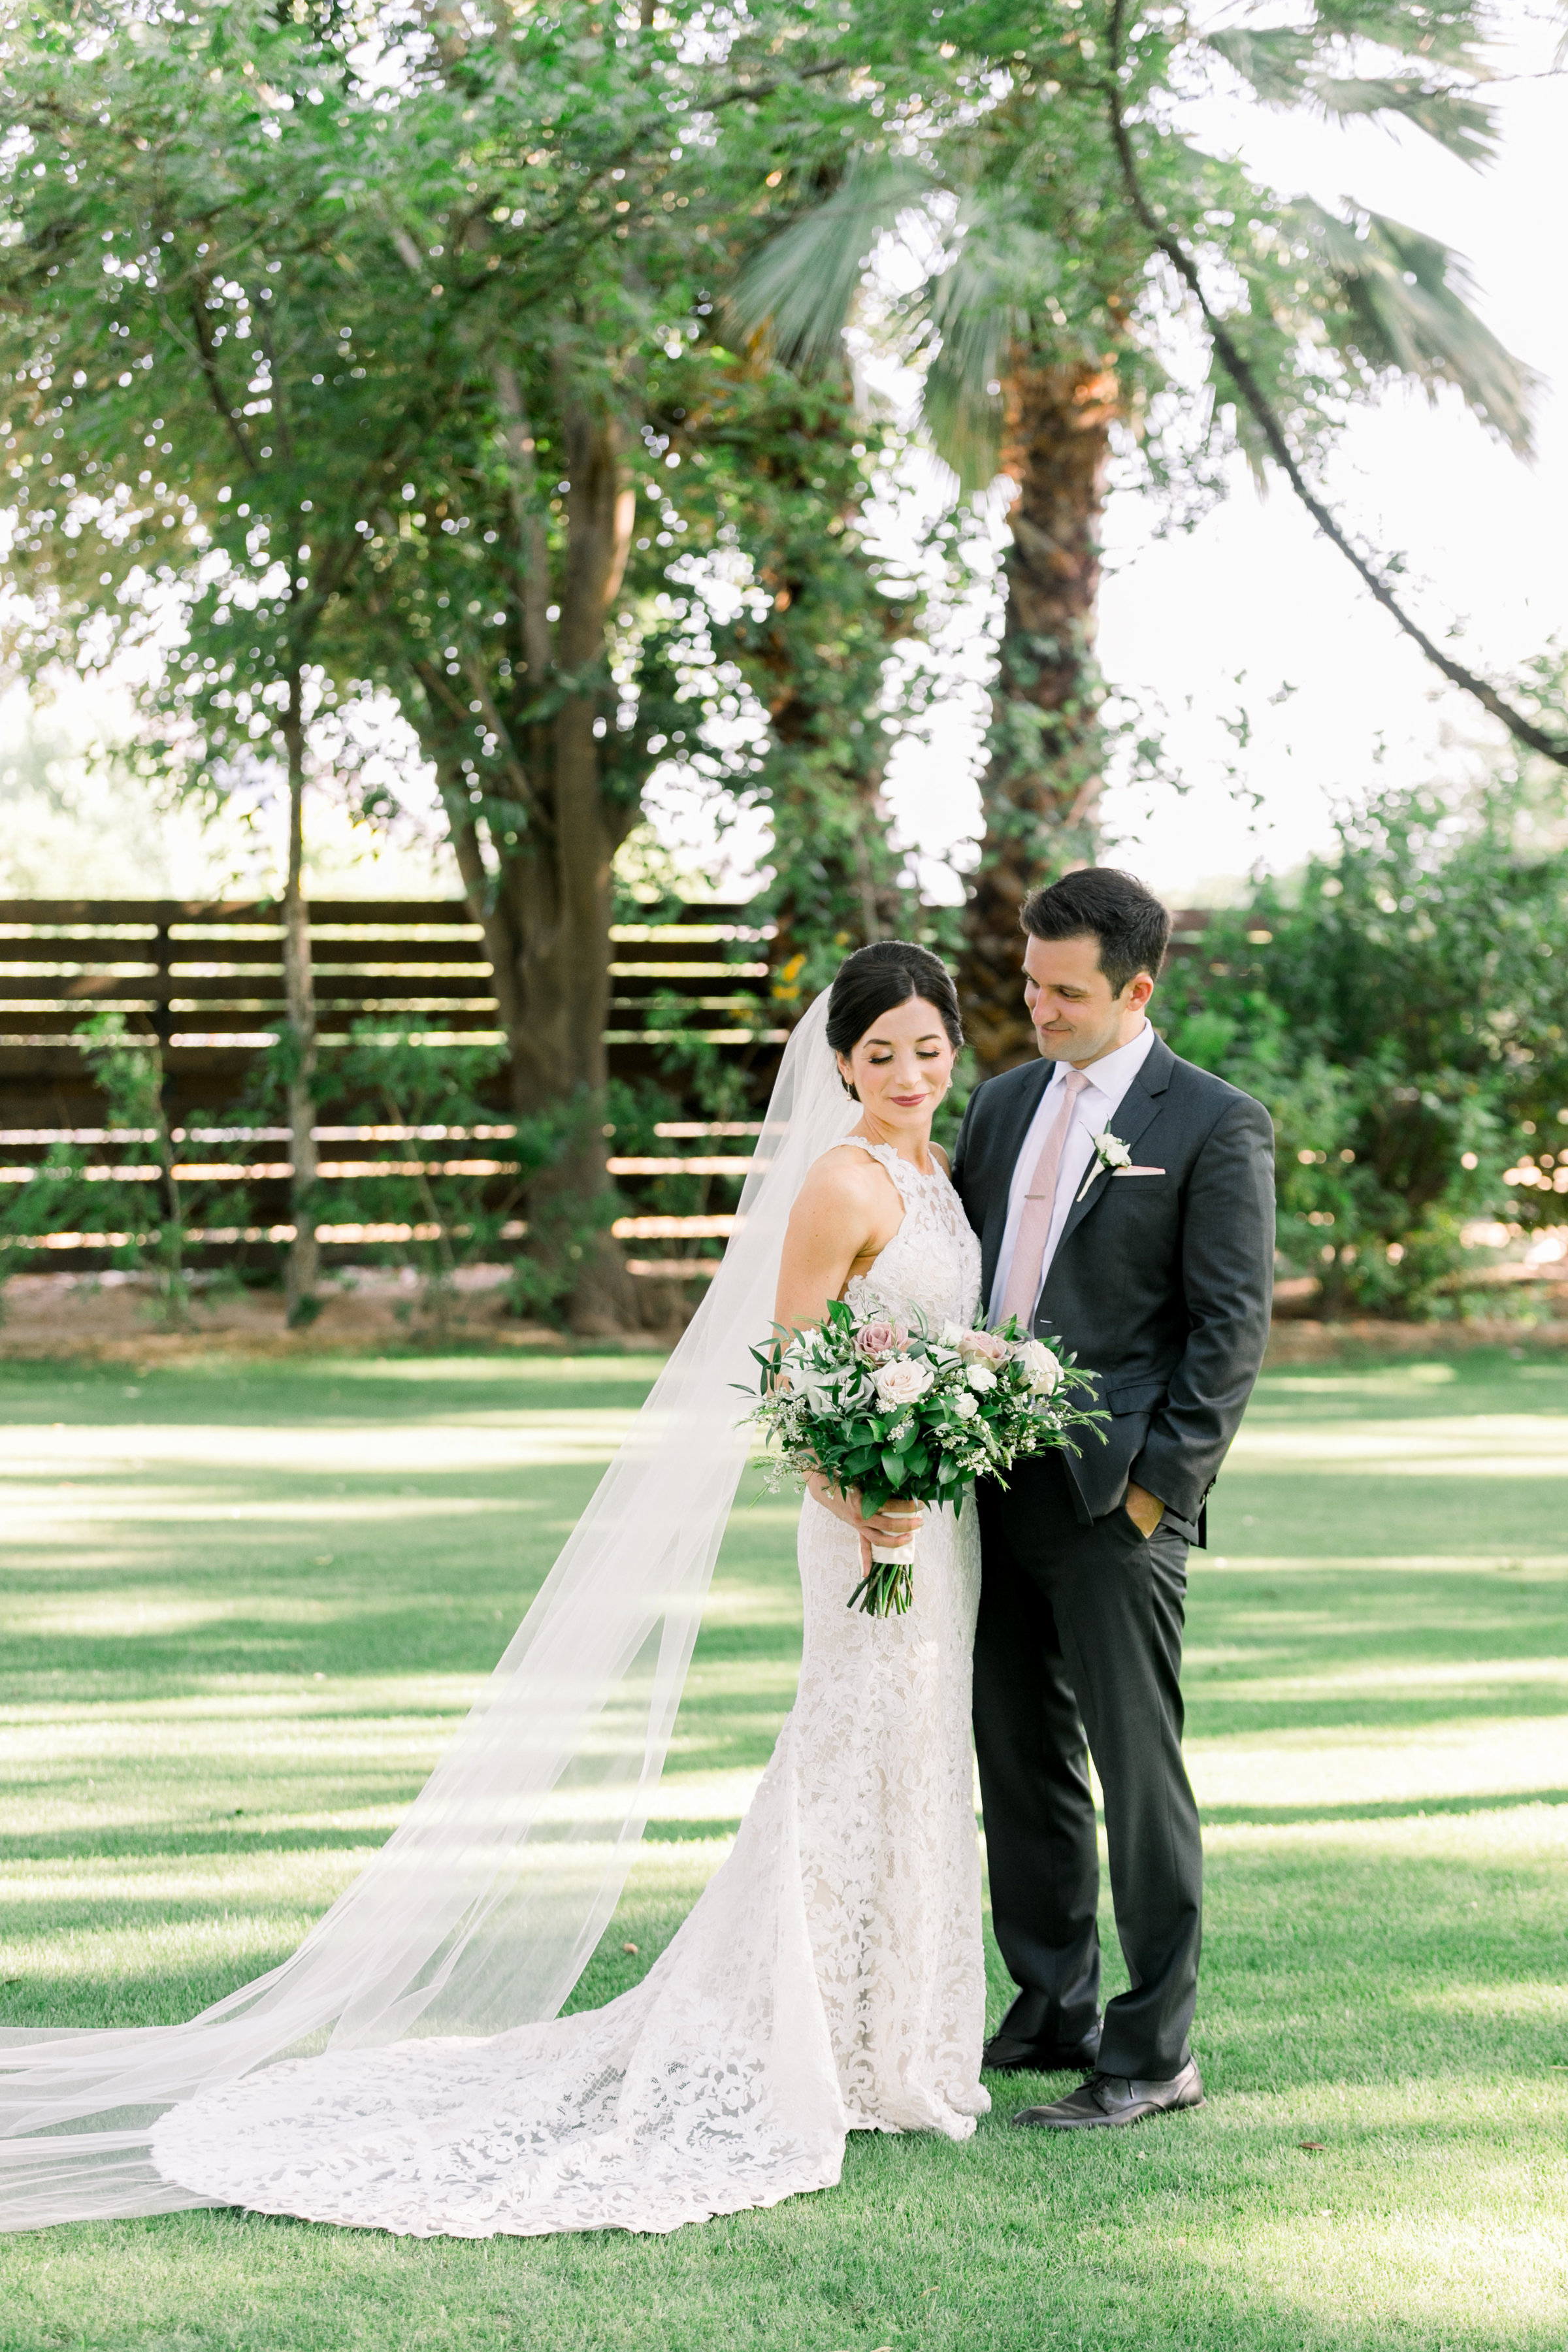 Karlie Colleen Photography - Venue At The Grove - Arizona Wedding - Maggie & Grant -69